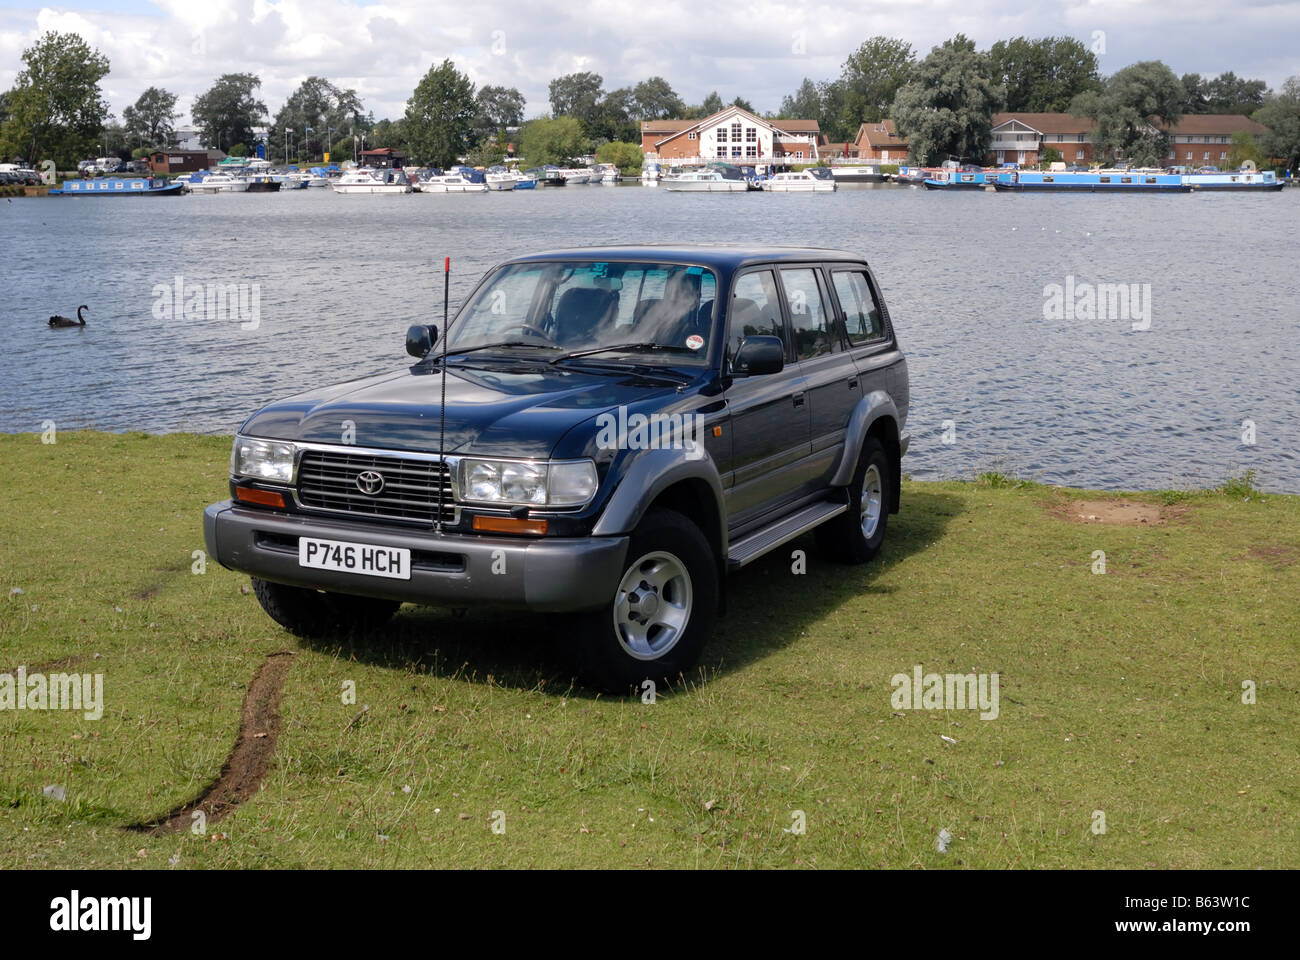 Toyota Land Cruiser Amazon long wheelbase four wheel drive Registration number P746 HCH LRM Show Billing 2008 Land Rover Monthly Stock Photo